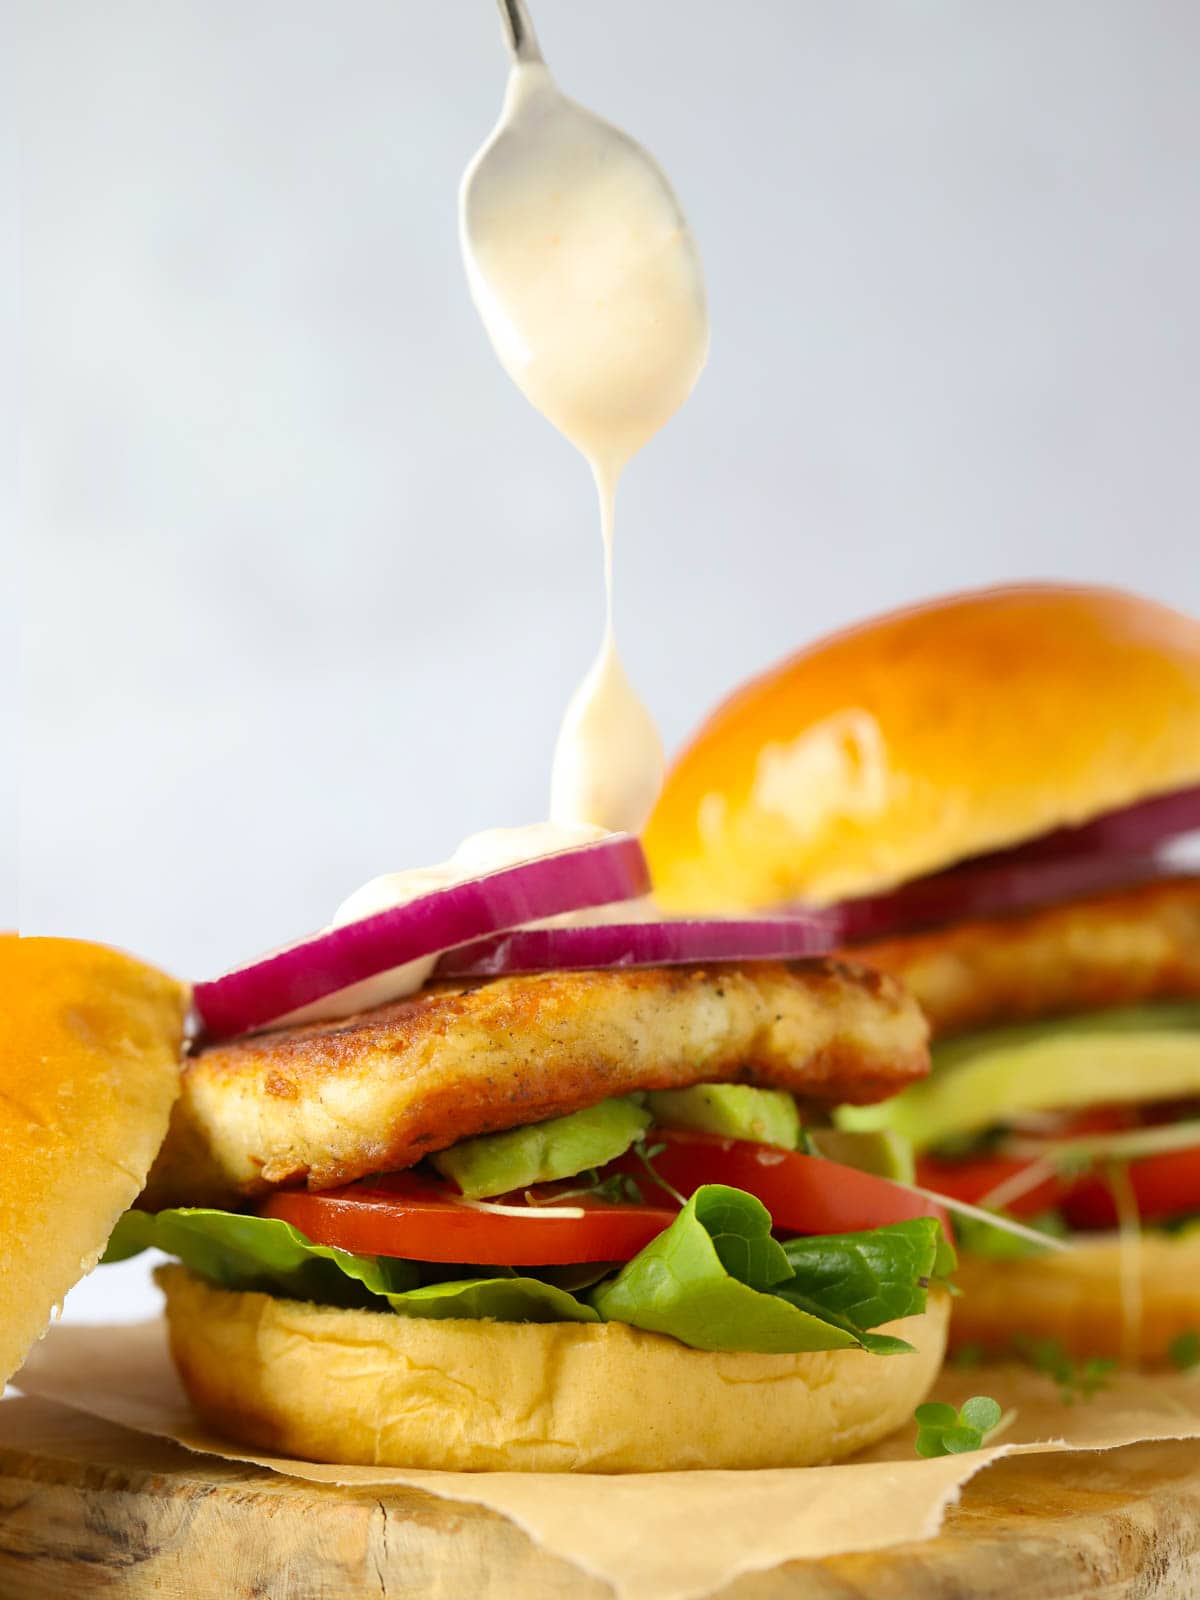 A spoon dripping sweet chilli mayo onto a halloumi burger with red onions on on a bun.